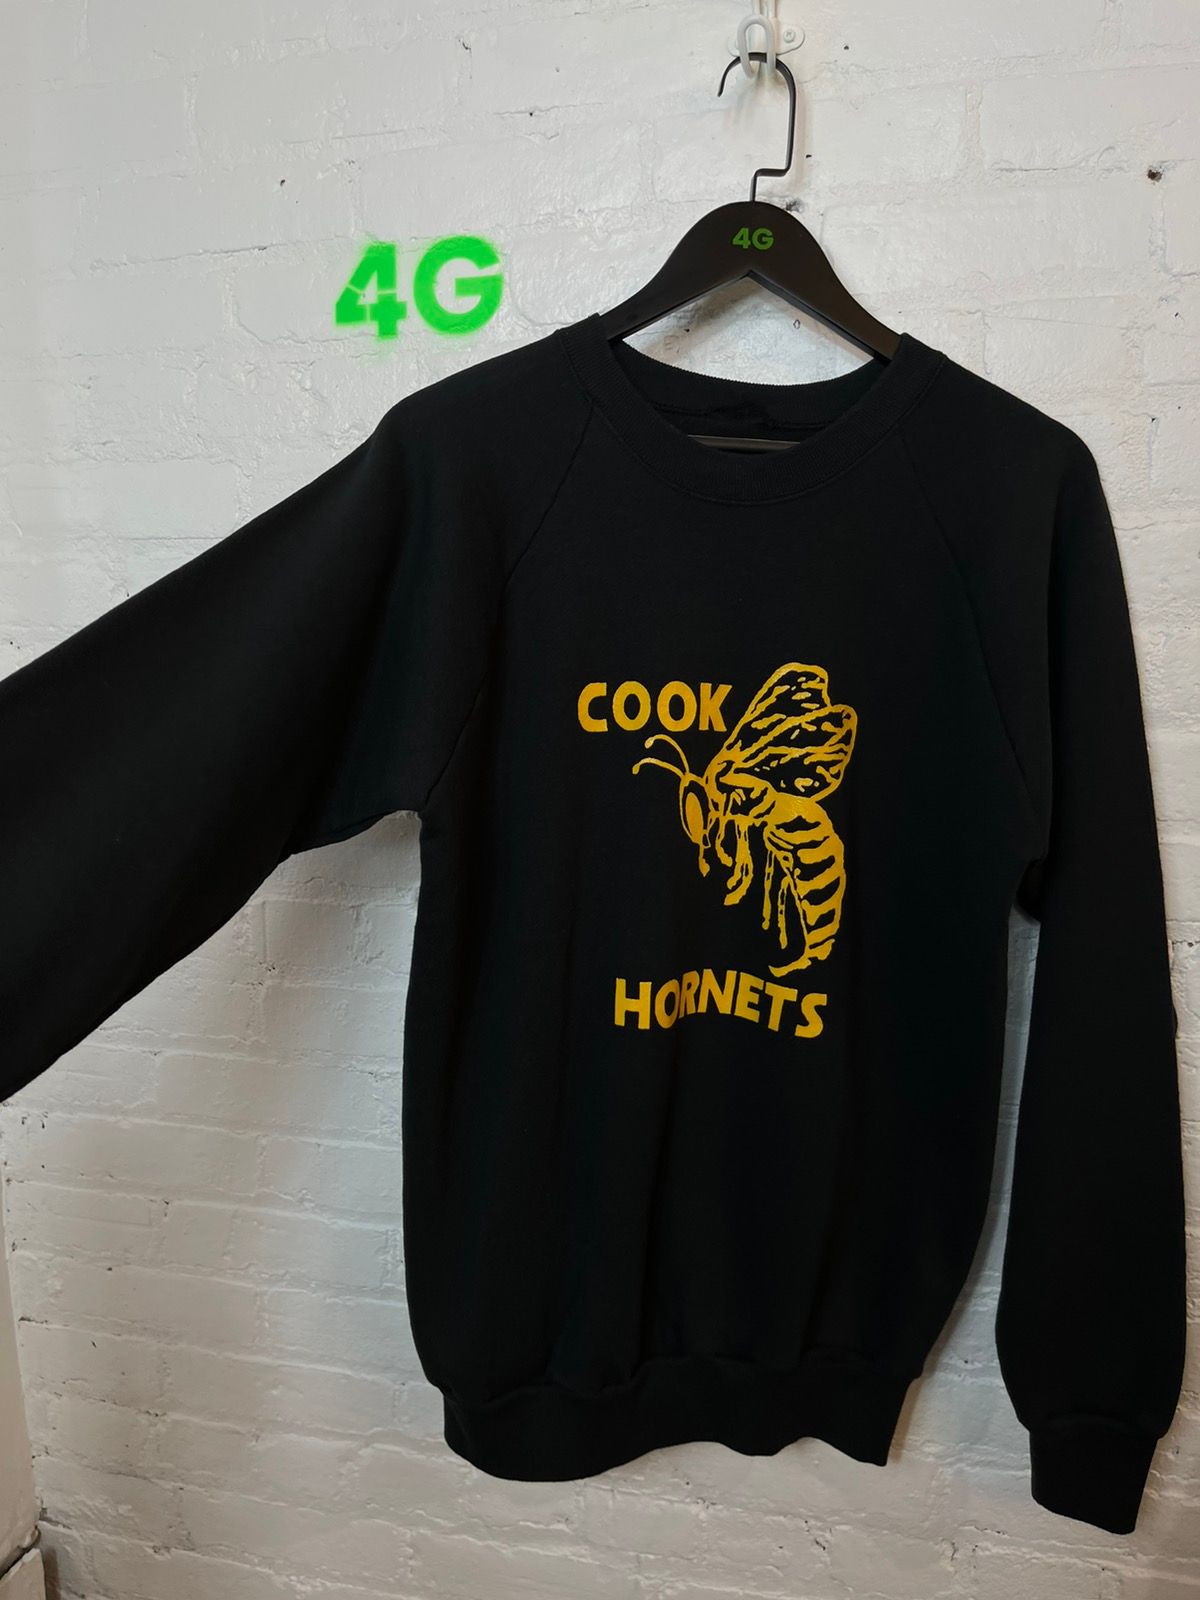 Vintage 90s HORNETS School sweater pullover Shirt